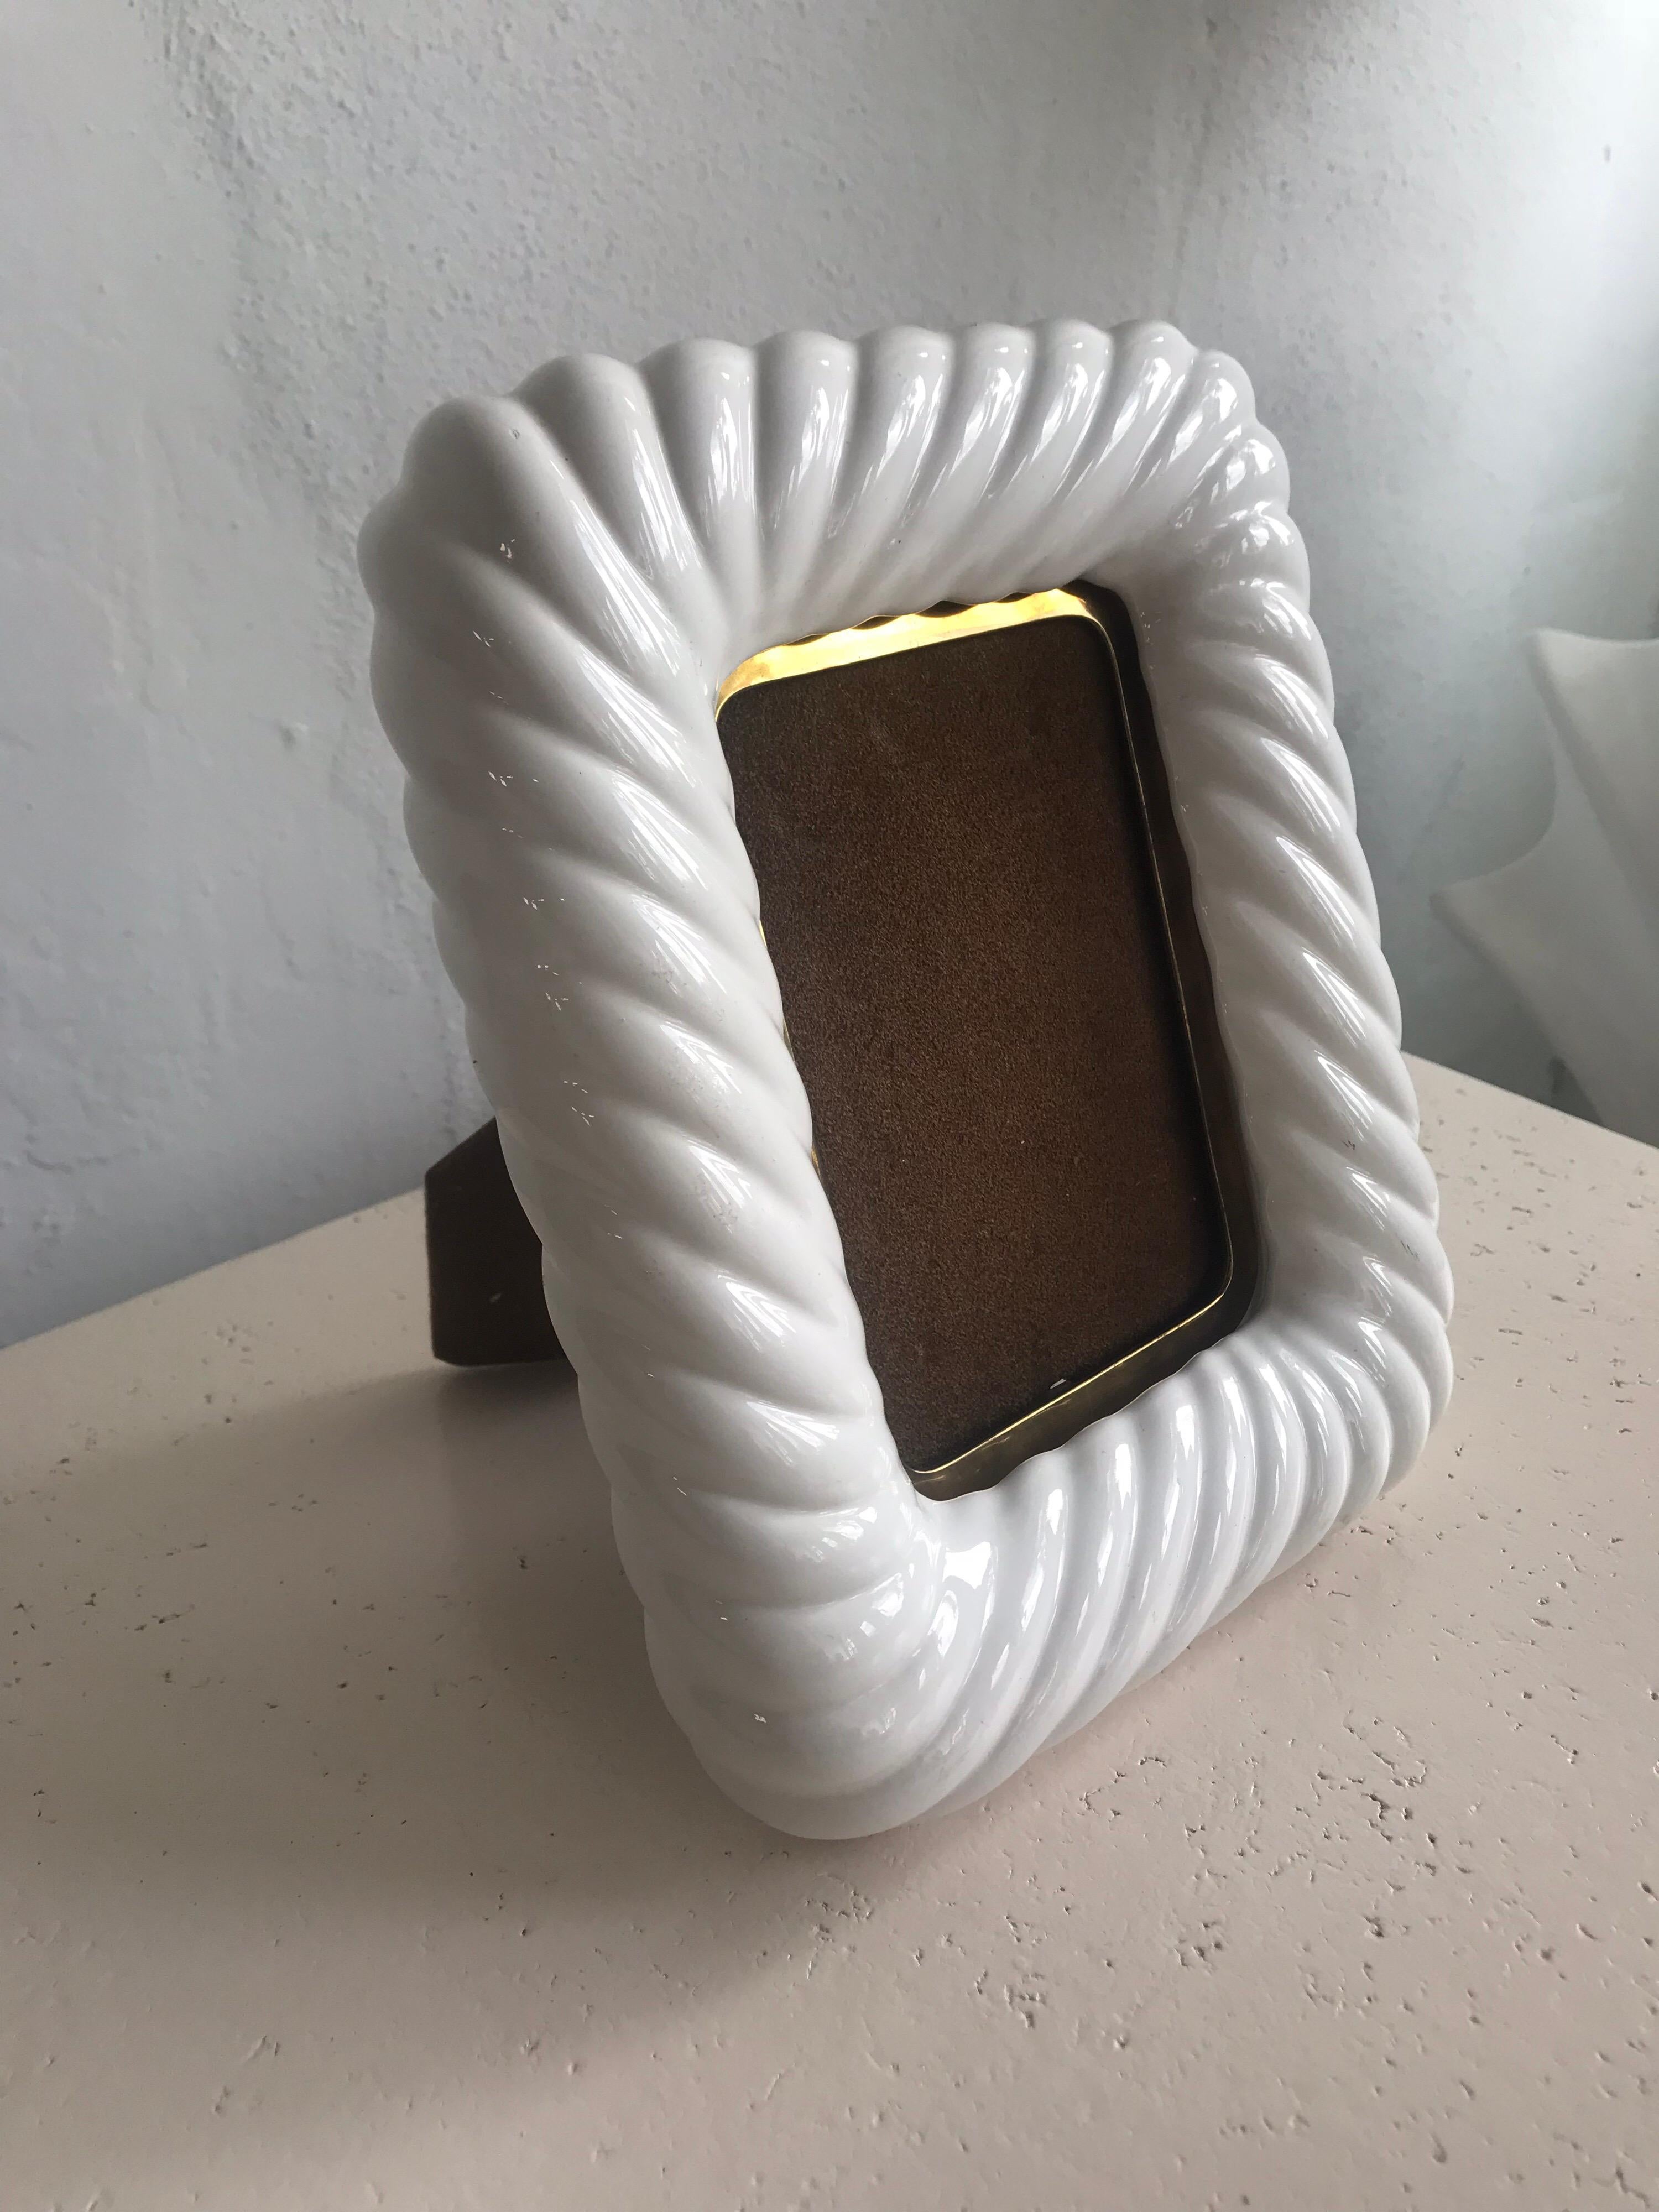 Picture or photo frame rendered in ivory glazed porcelain ceramic and patina brass designed by Tommaso Barbi, Italy, 1970s, Signed.

Fits a 4x6 photo.